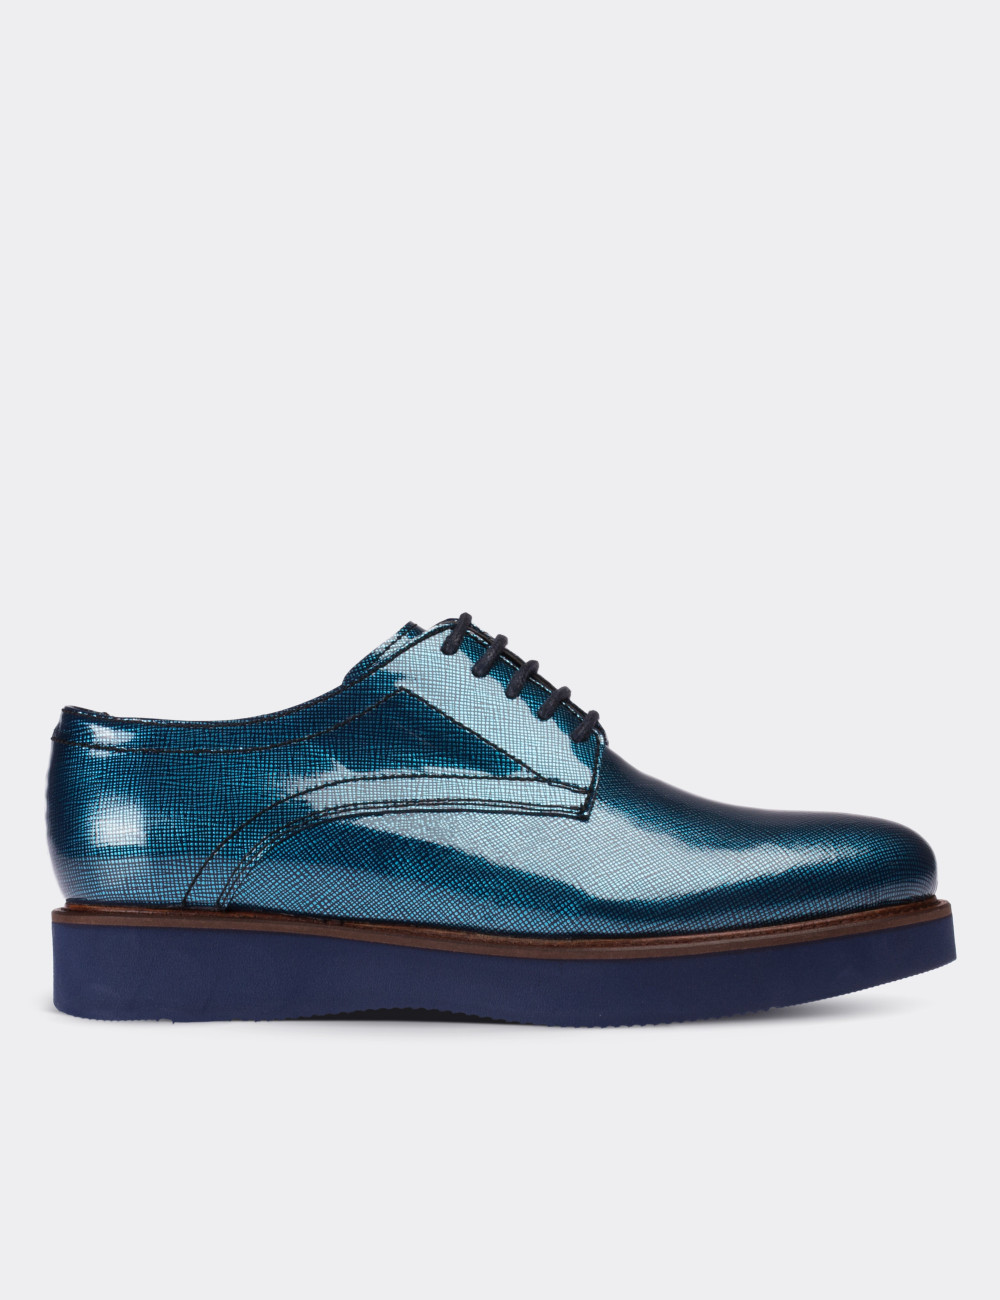 Blue Patent Leather Lace-up Shoes - 01430ZMVIE02